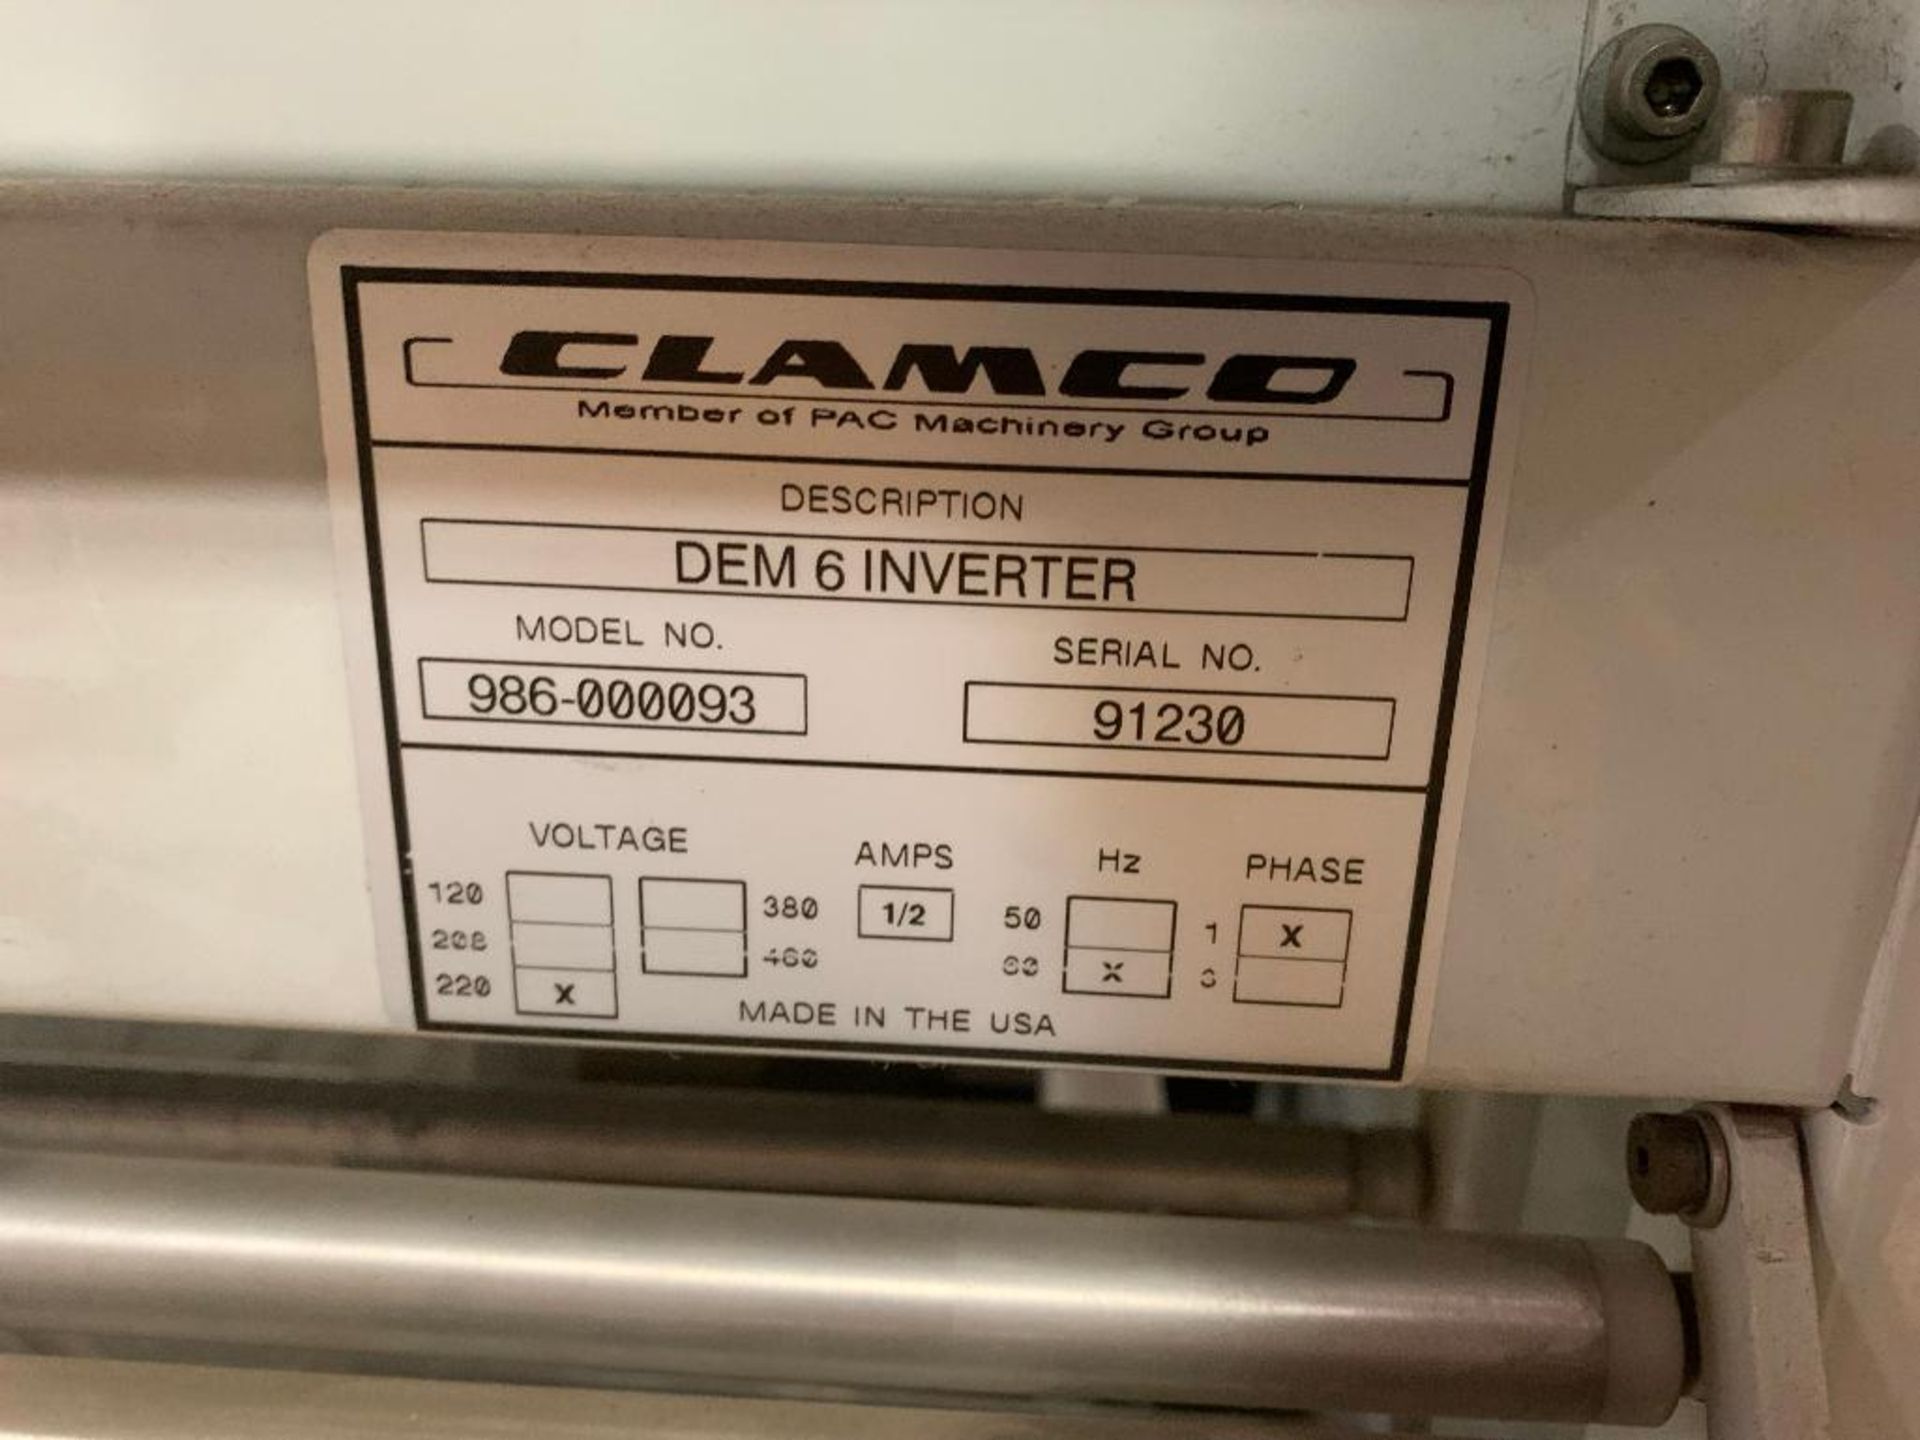 2014 Clamco DEM 6 Combo Semi-Automatic Heat Sealer, Tunnel, and Inverter System Model 986-000046, S/ - Image 8 of 8